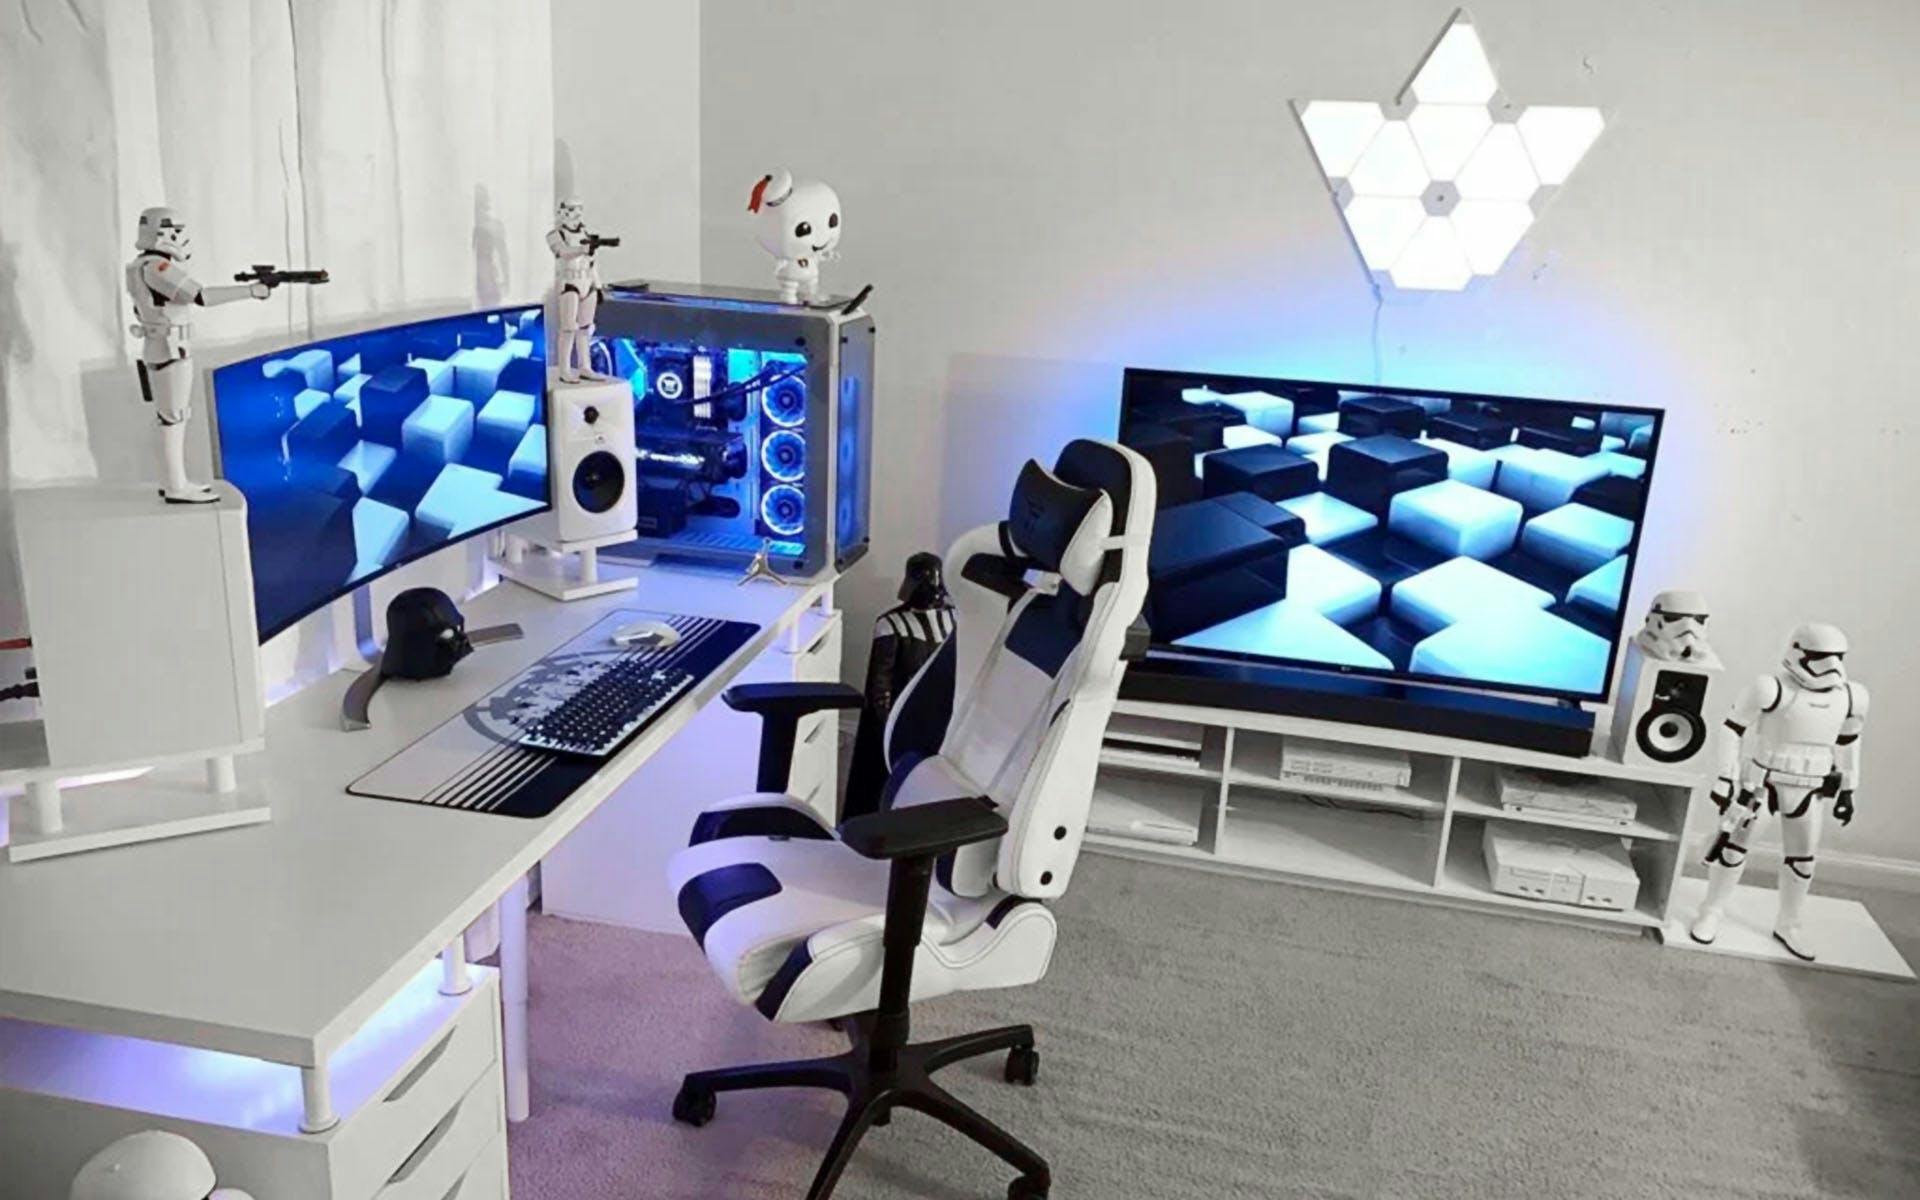 Design Tips to Transform Your Gaming Room Experience